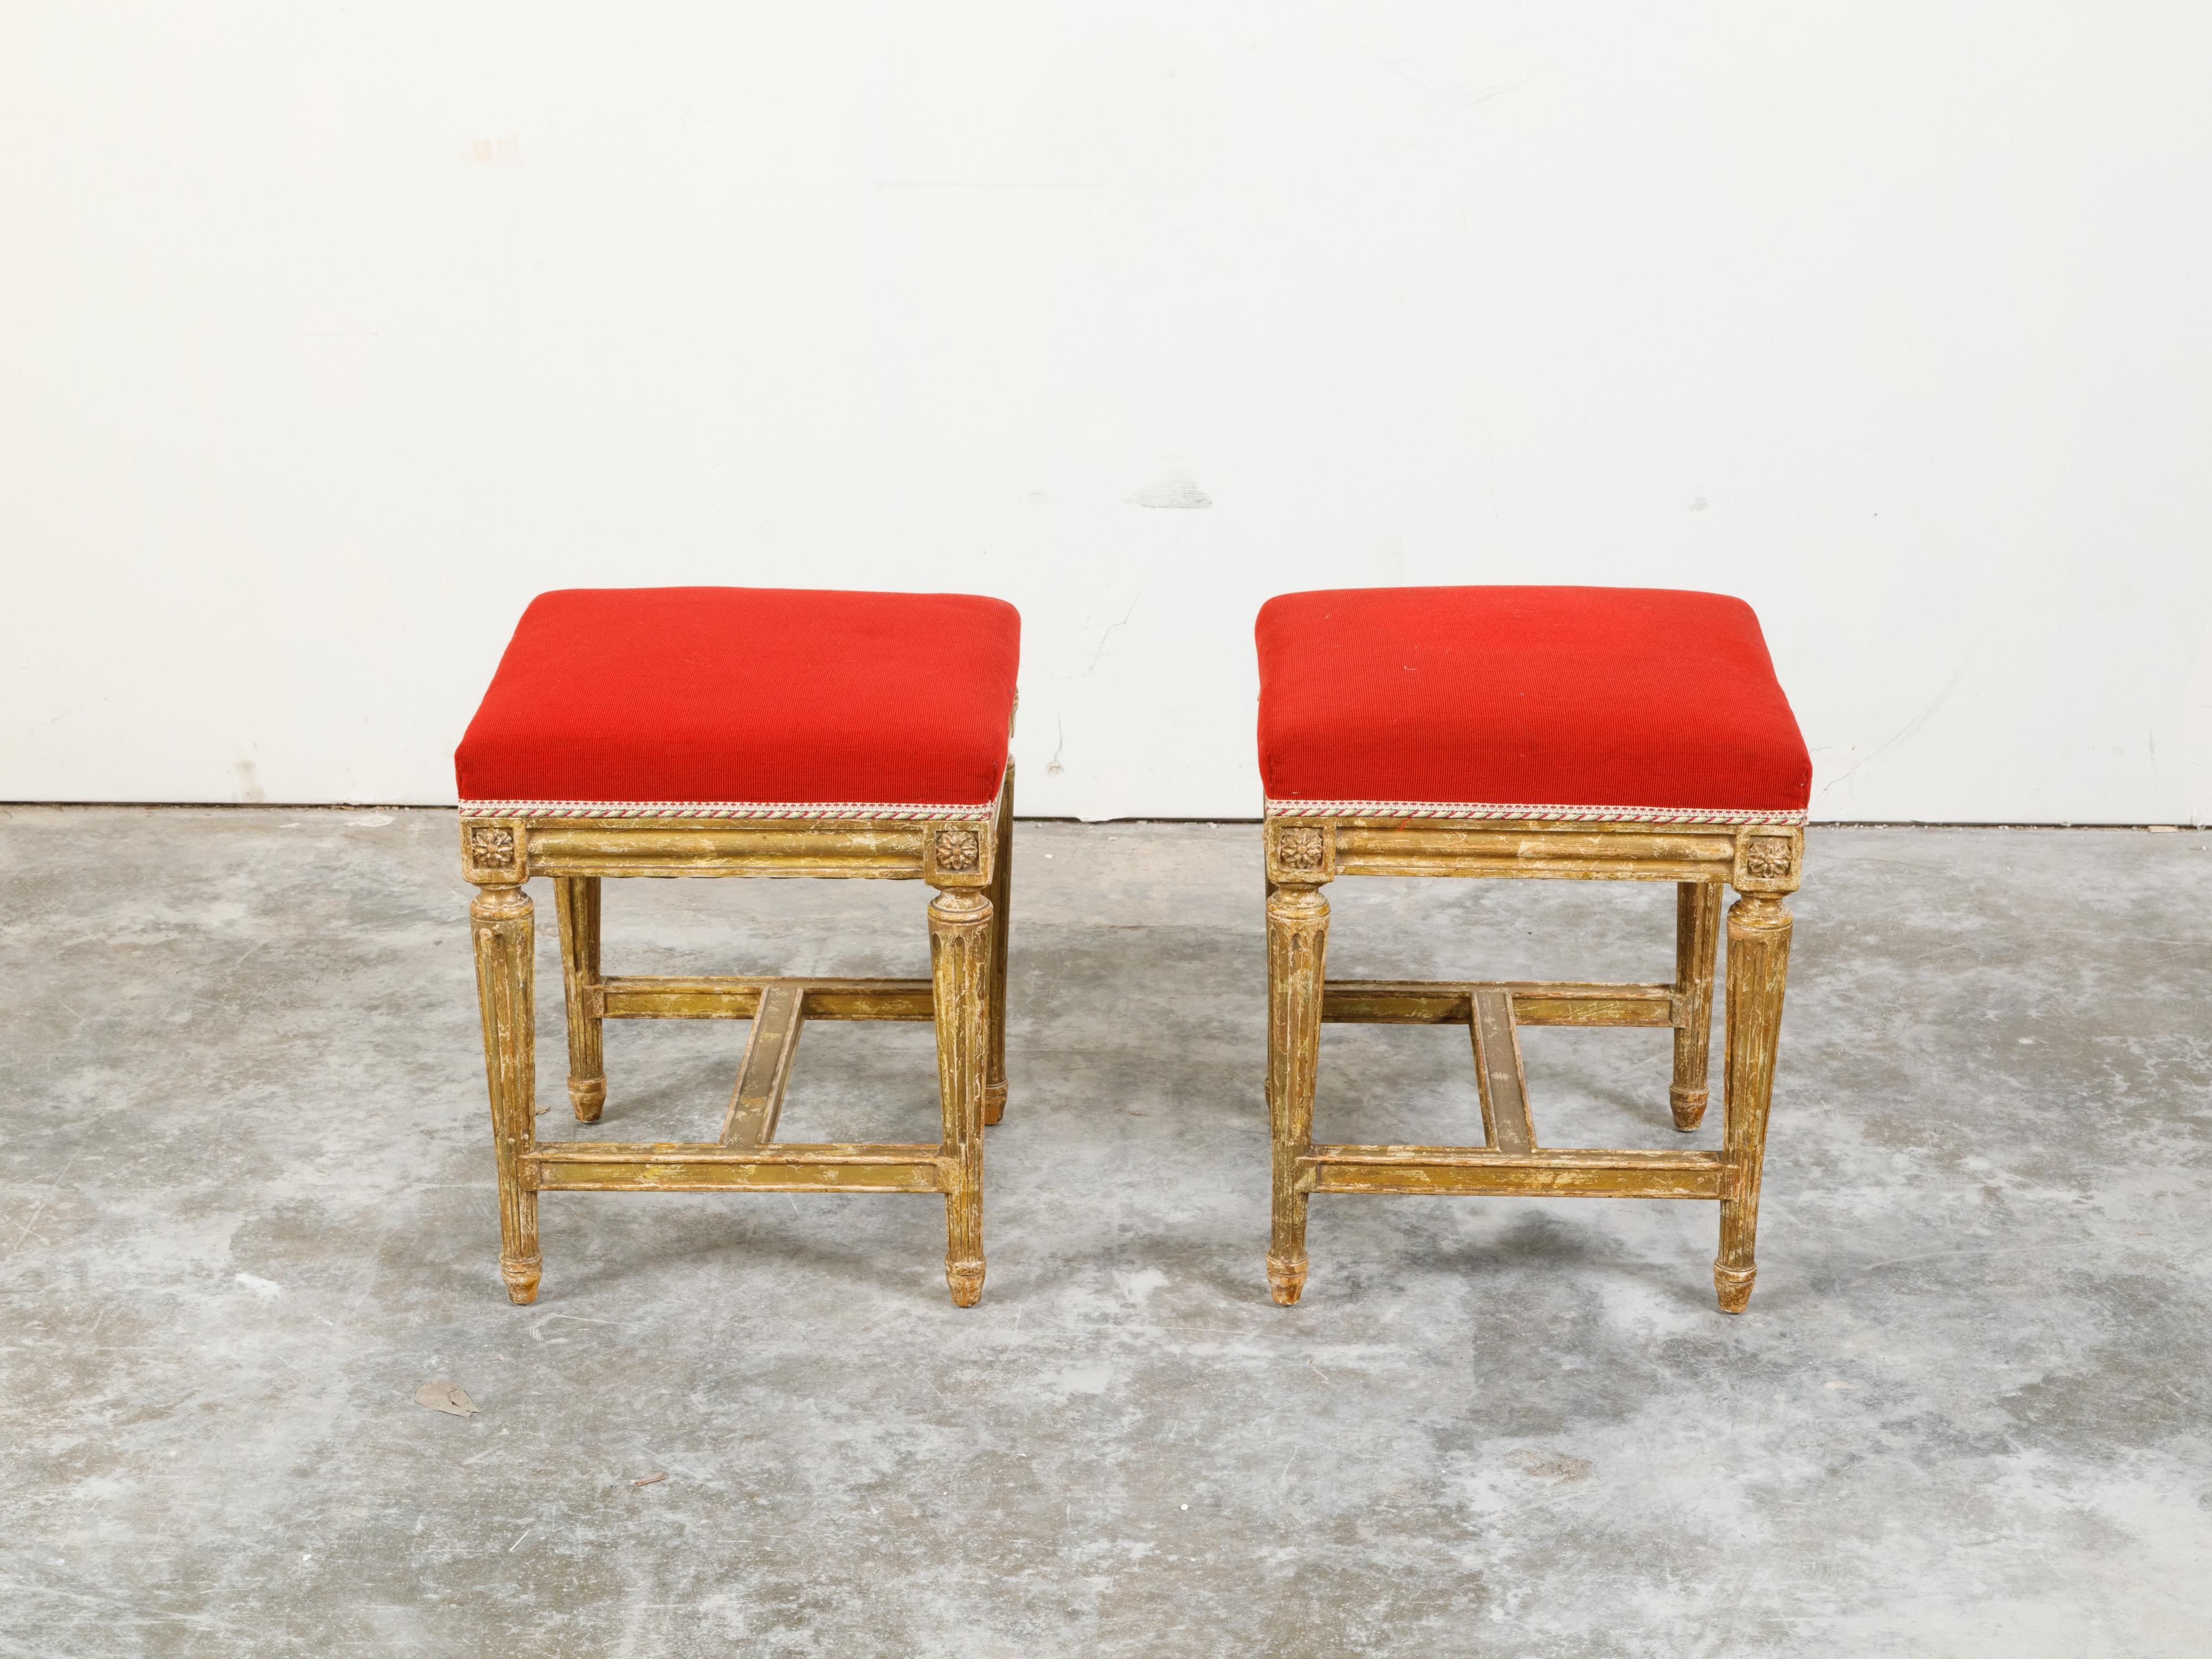 A pair of Neoclassical style painted wood stools from the 19th century, with fluted legs, carved rosettes and red upholstery. Created during the 19th century, each of this pair of Neoclassical style stools features a square seat upholstered with a